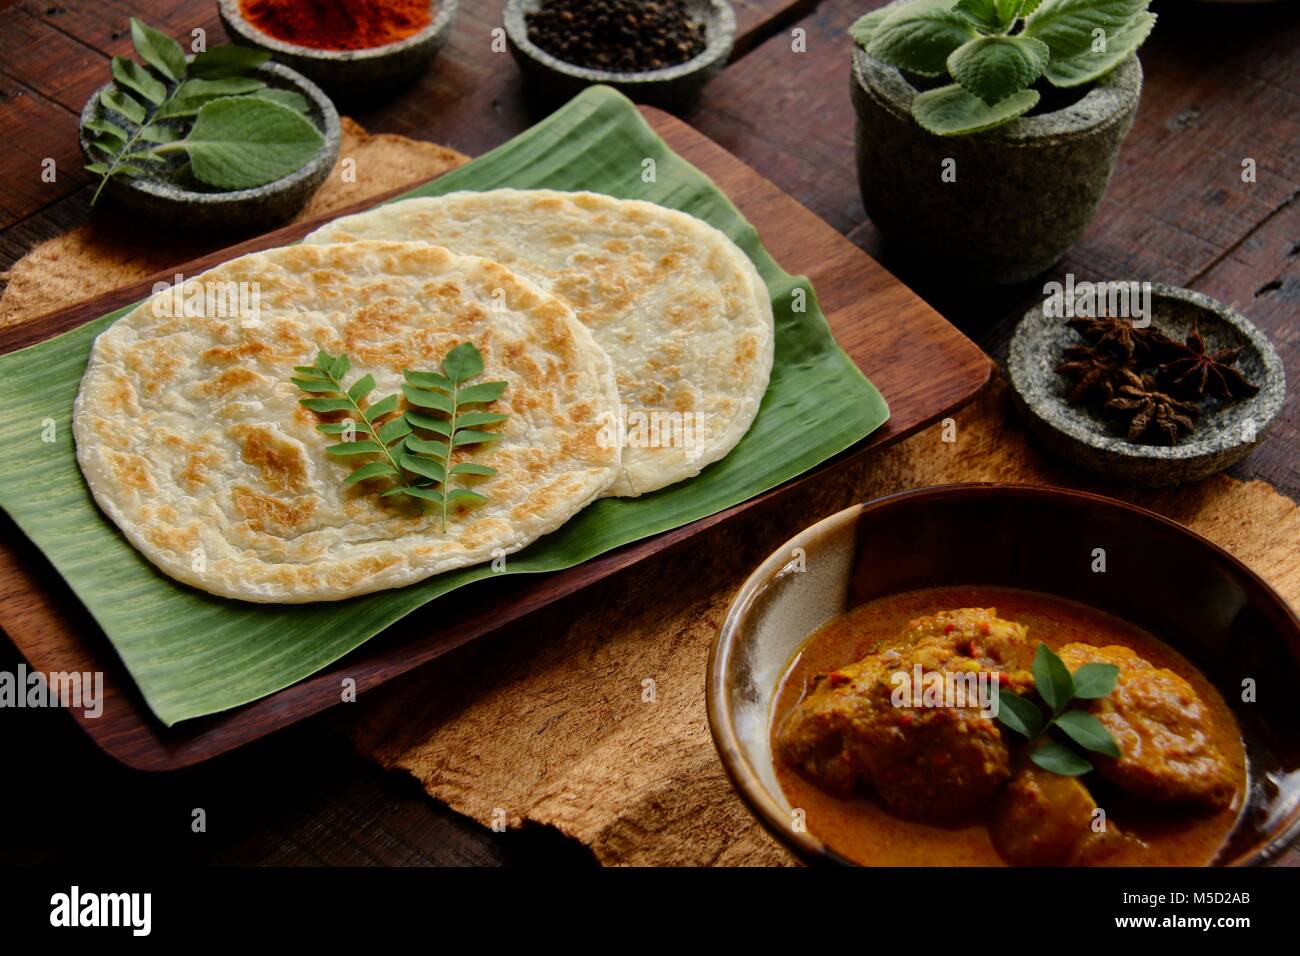 Roti Prata with Chicken Curry. Indian-influenced dish of flatbread with chicken and potato curry popular in Singapore and Malaysia. Stock Photo